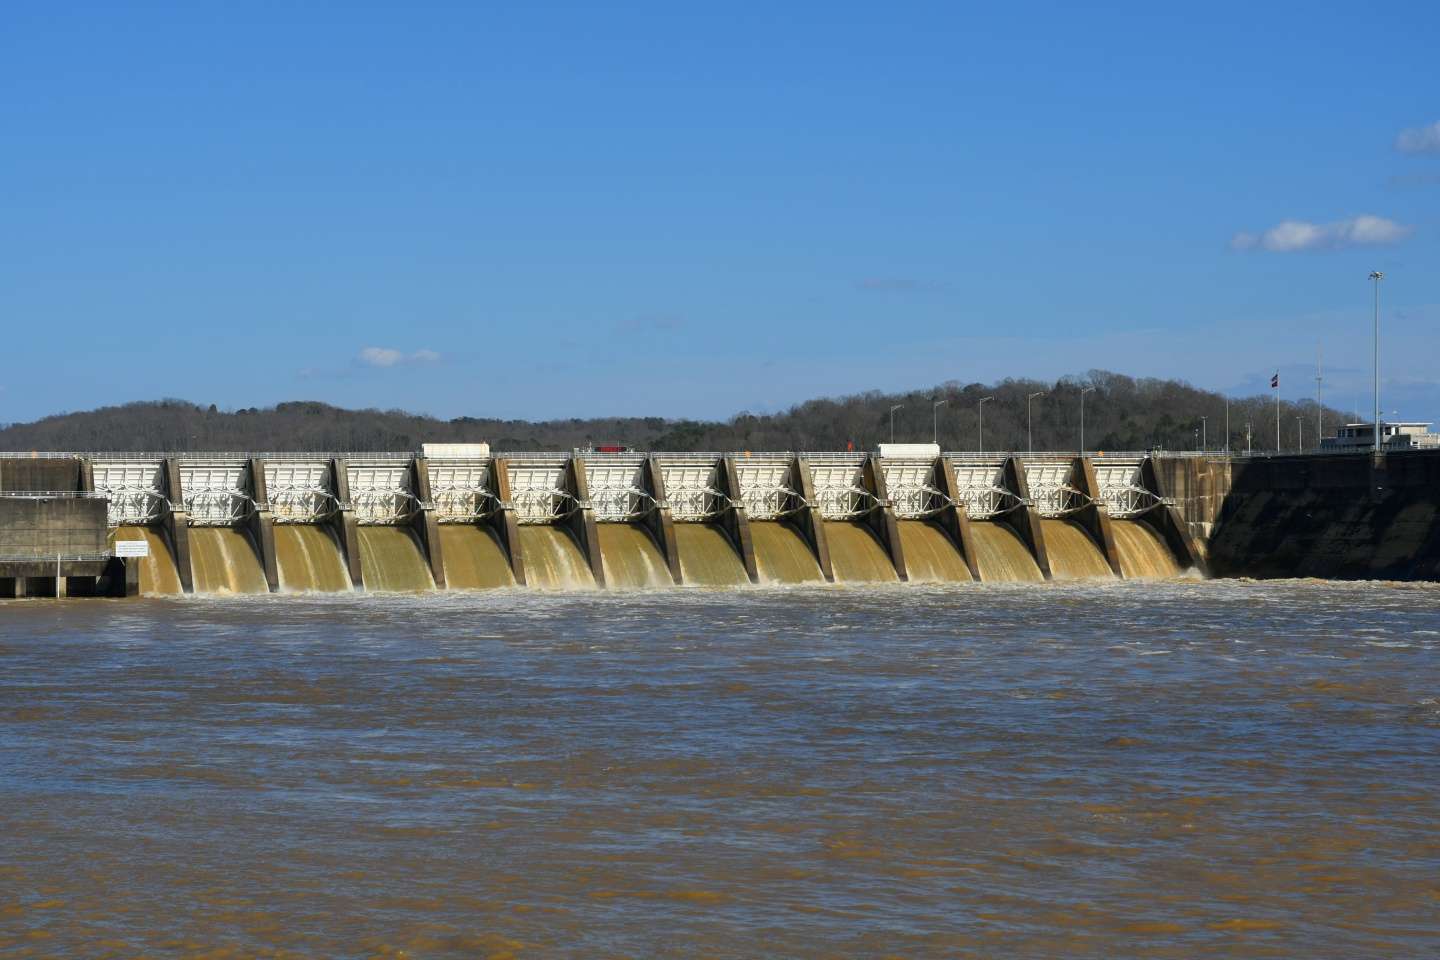 At the opposite end is Fort Loudoun Dam, the uppermost of the Tennessee Valley Authority Dams on the Tennessee River, which winds 652 miles from Knoxville, into northern Alabama, and back up to West Tennessee and into Kentucky Lake. The dam is 122 feet high and stretches 4,190 feet across the river. To the right is the lock chamber that provides navigation into Watts Bar Lake. 
